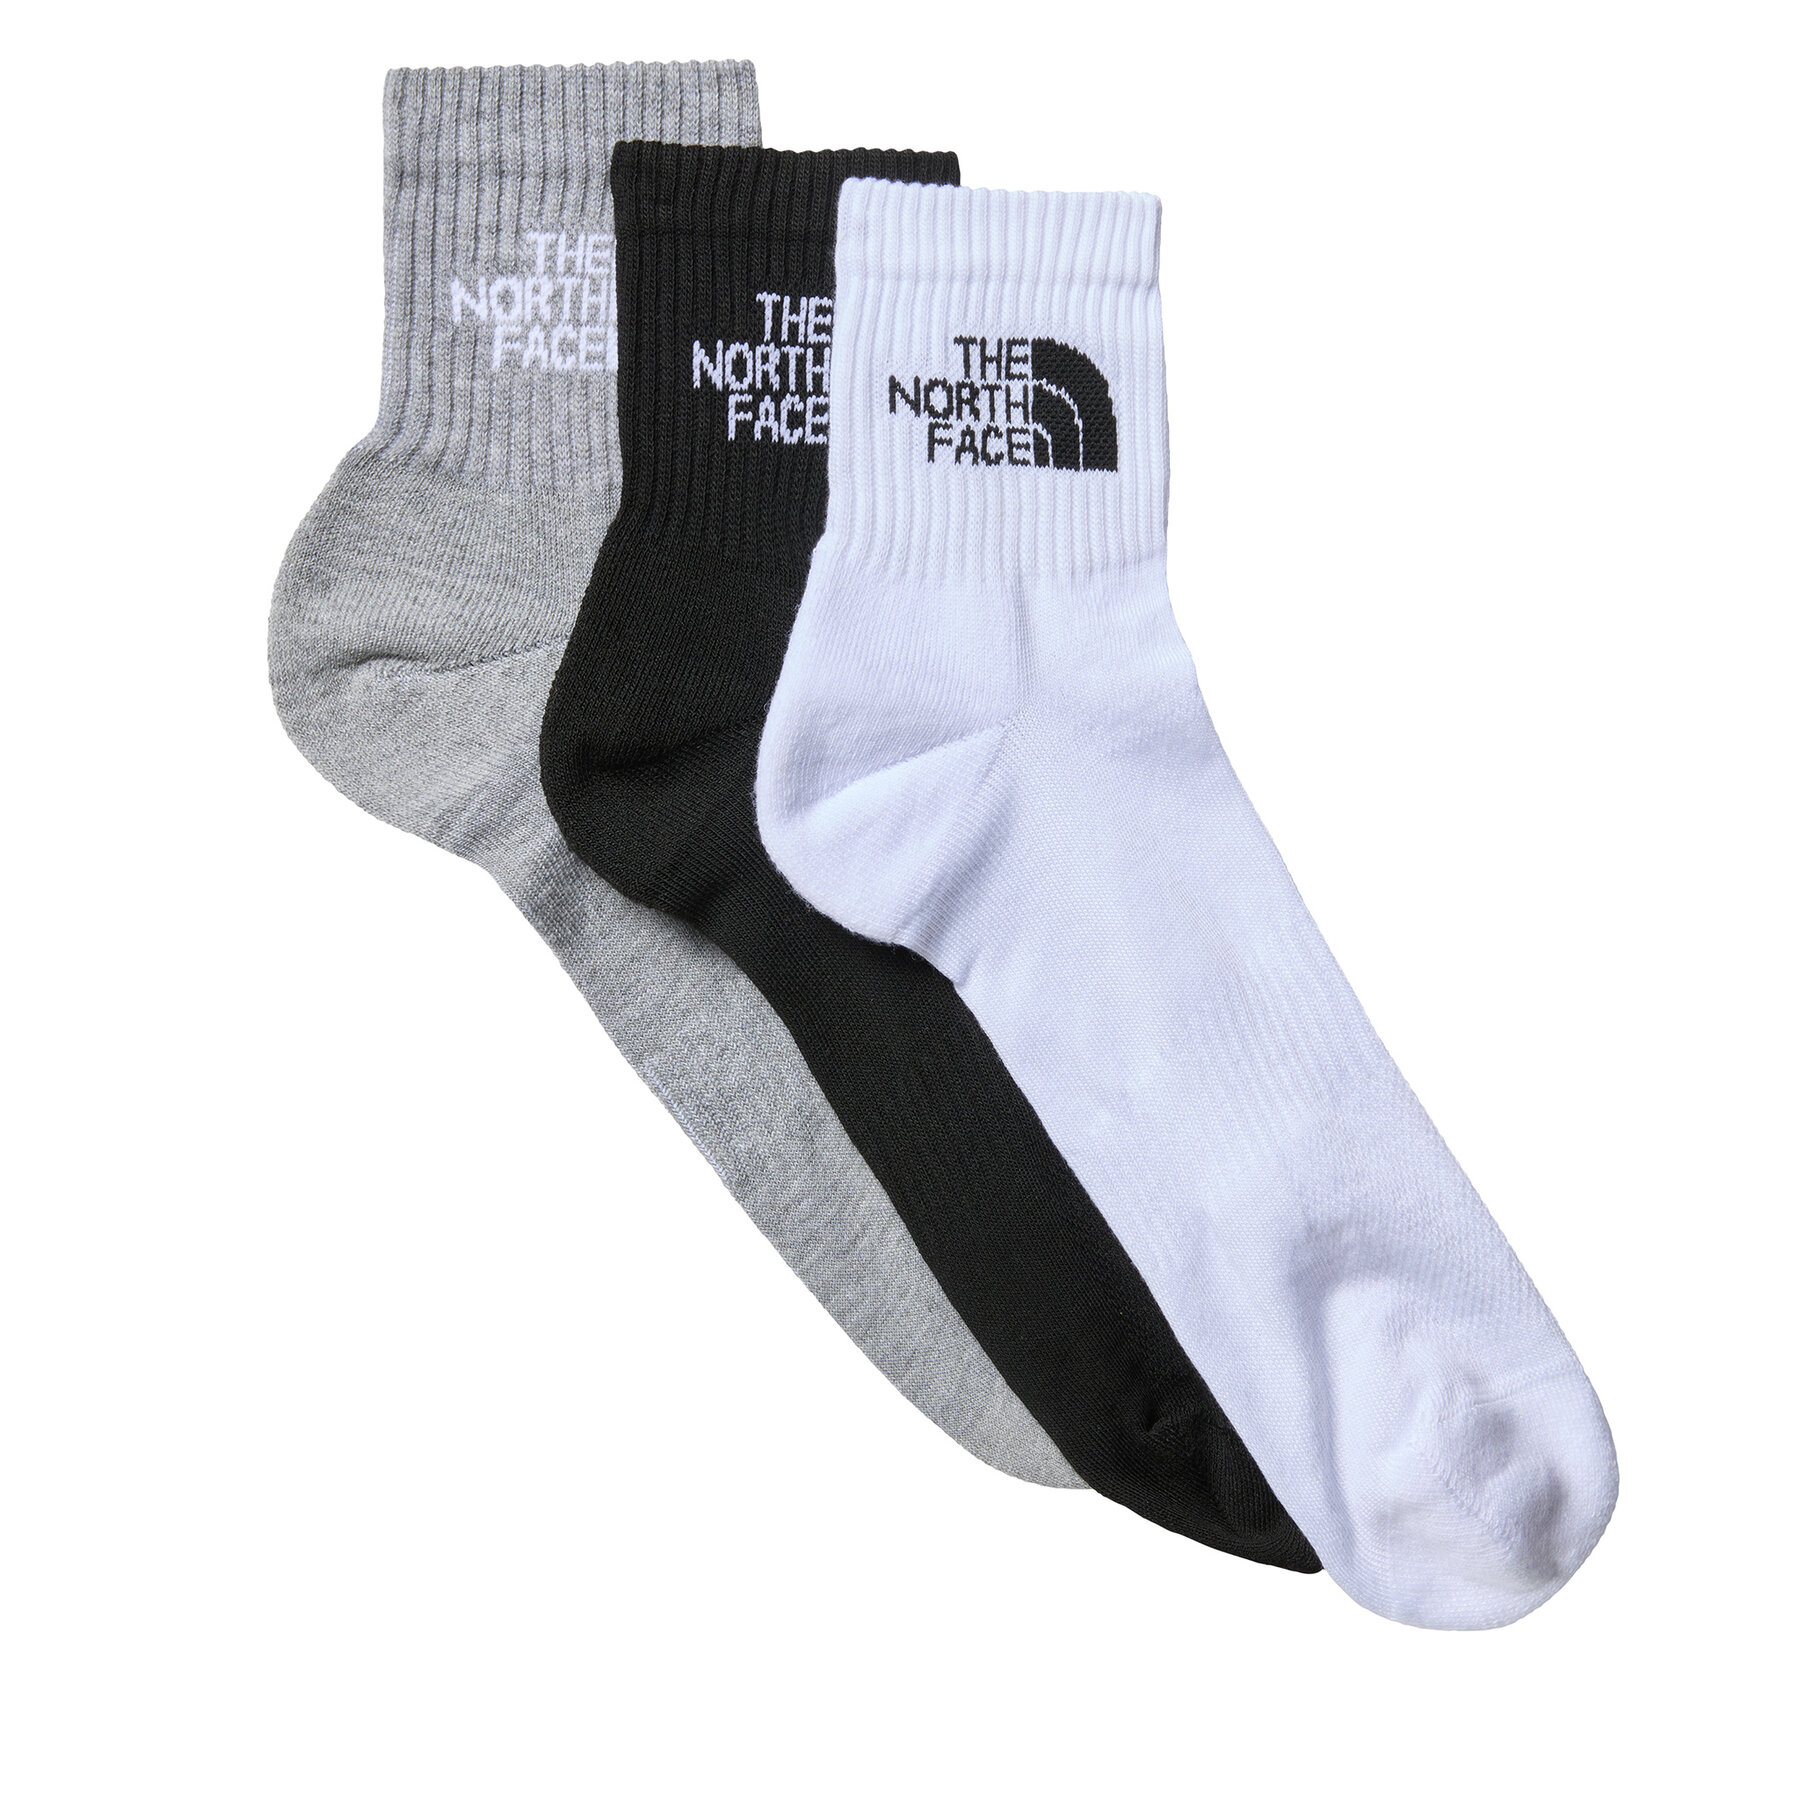 3er-Set hohe Herrensocken The North Face NF0A882G3OW1 Black Assorted von The North Face